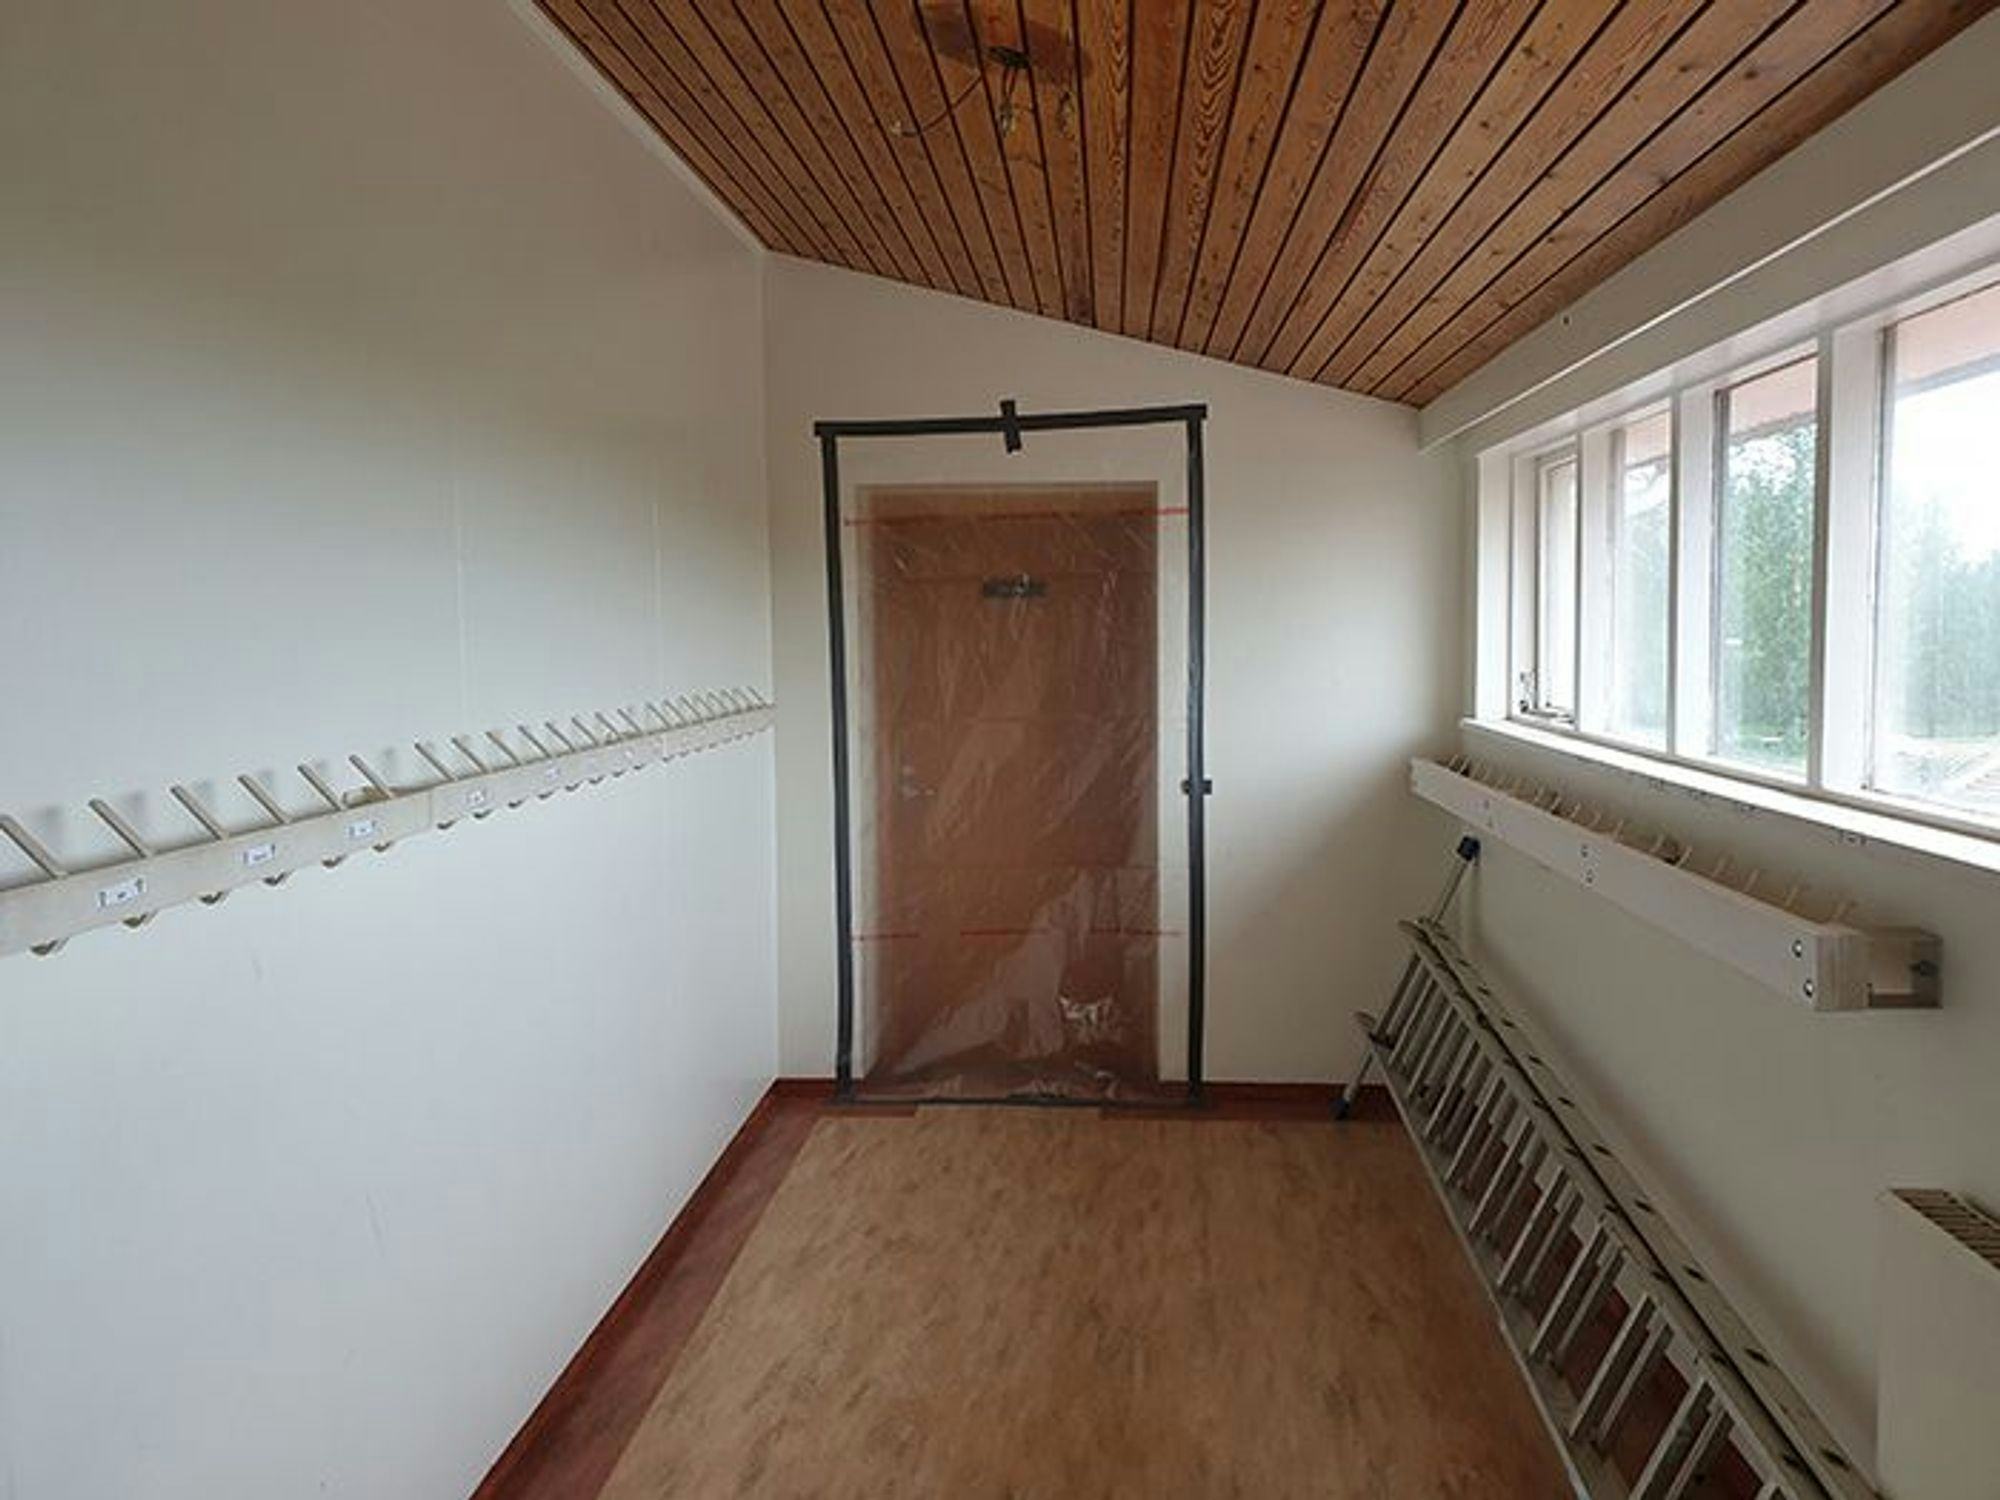 A small empty with wooden floor, ceiling and door and small windows